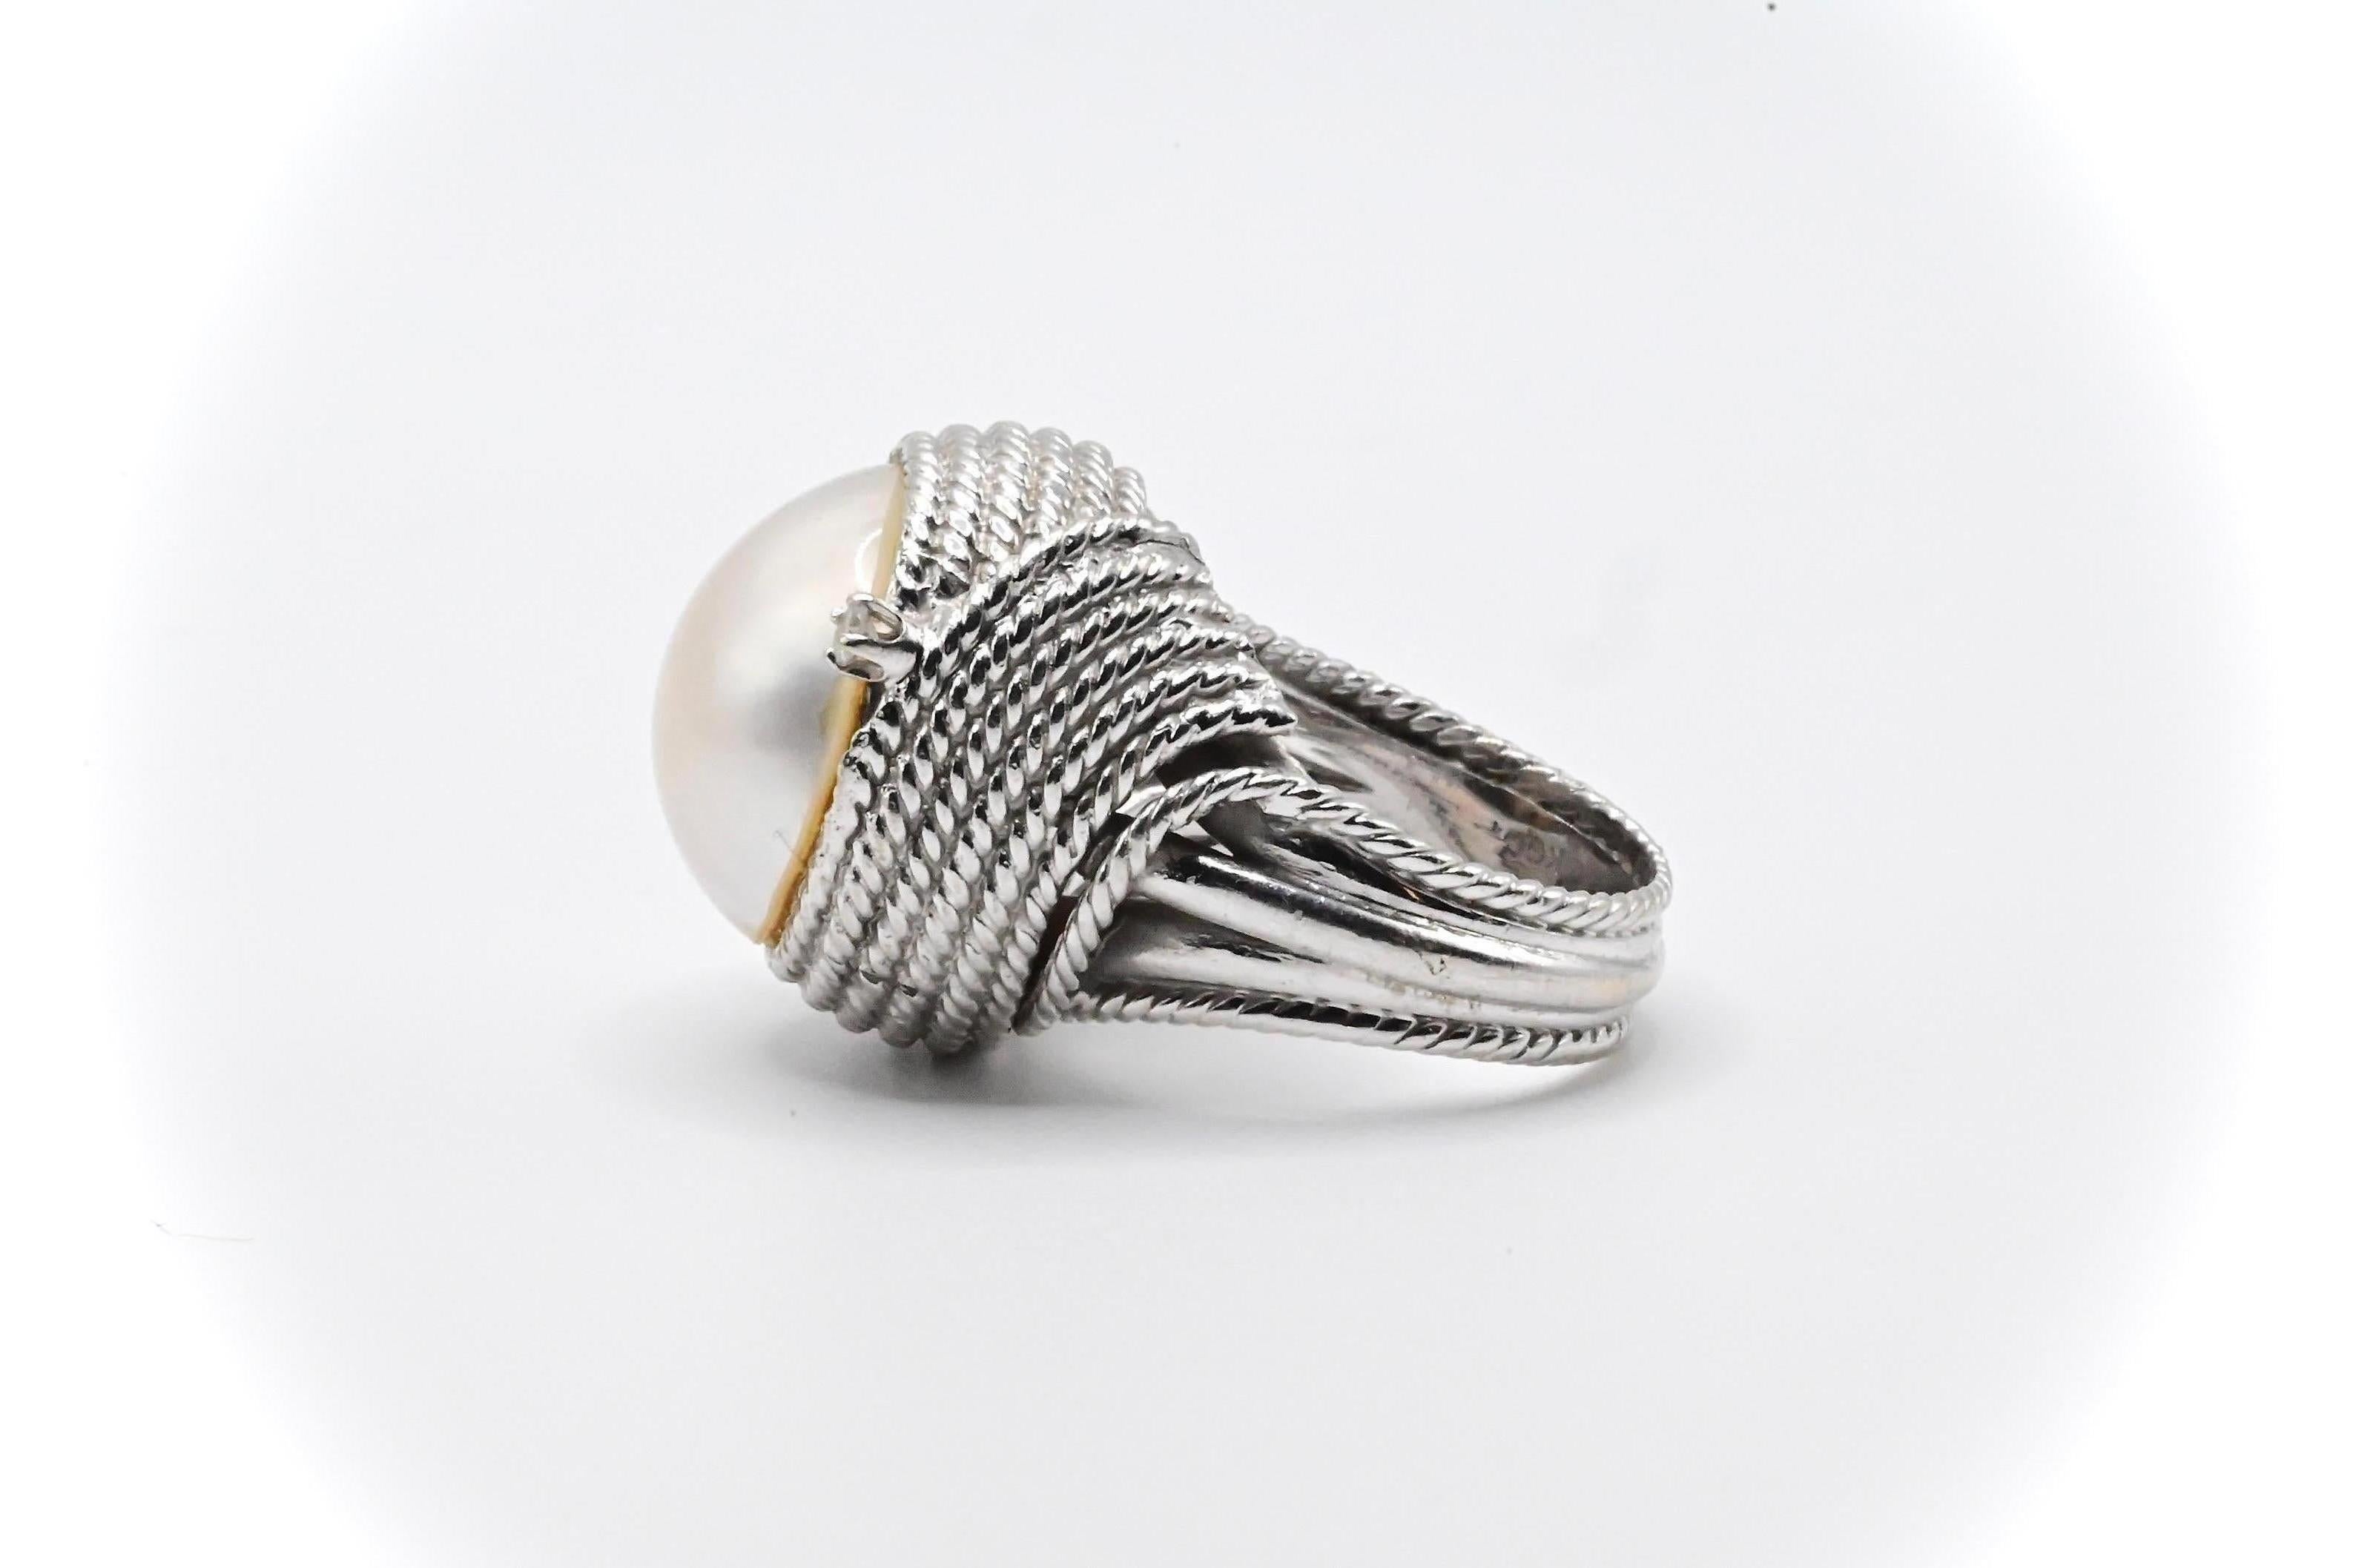 This is a stunning 14k white gold cocktail ring with an eye-catching pearl in the middle, and a simplistic diamond embellishment on both sides. It’s a size 7 ring that’s in good condition with some cosmetic wear, and weighs approximately 17 grams.